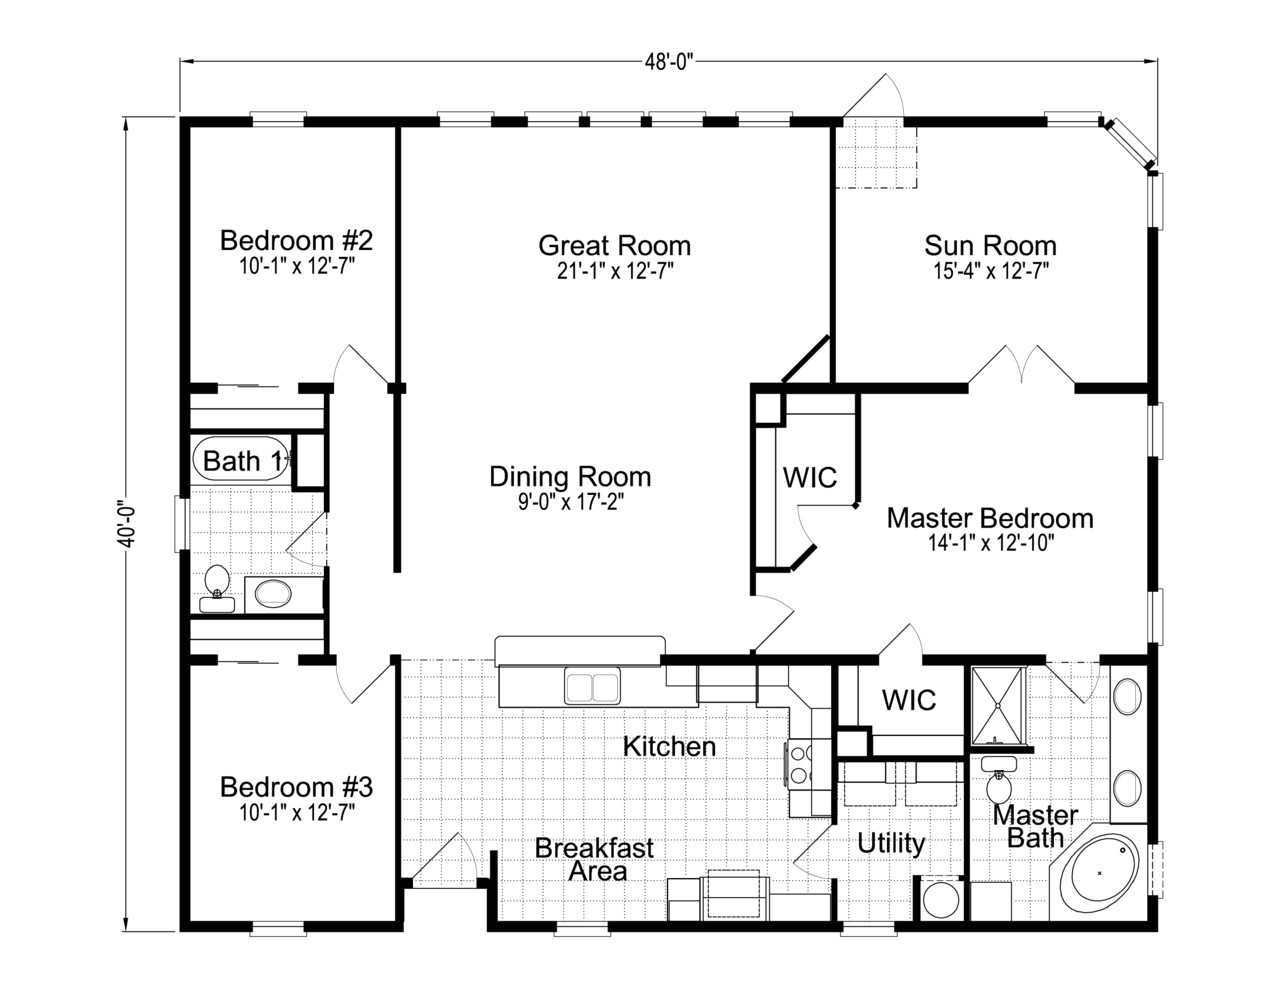 Floor Plan for Homes Wellington 40483a Manufactured Home Floor Plan or Modular